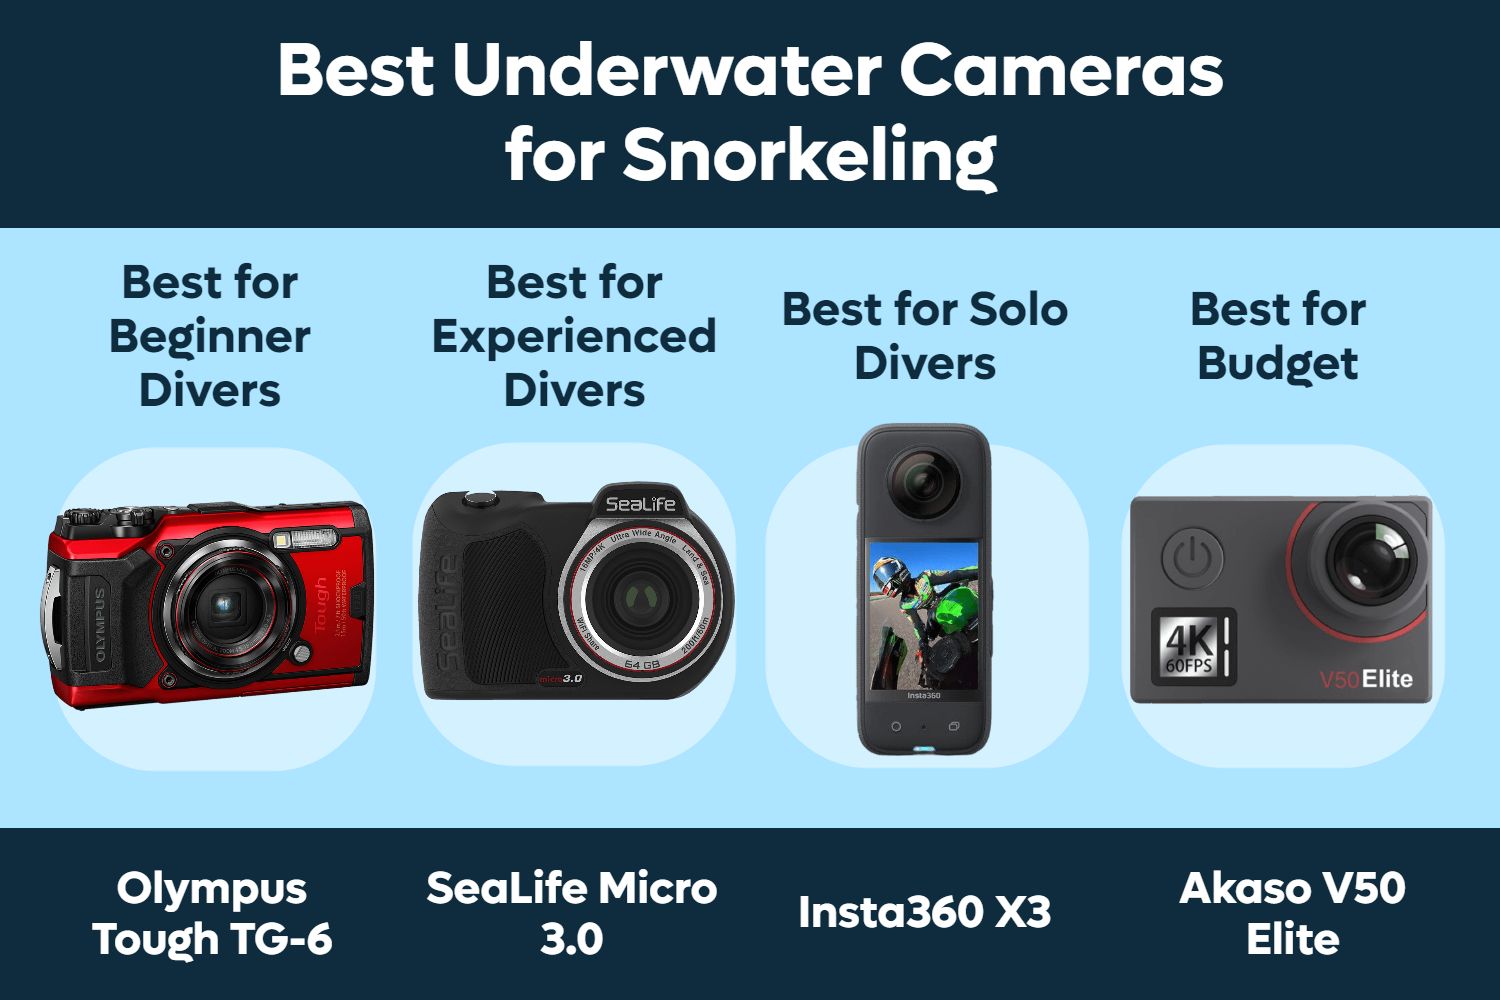 Best Underwater Camera for Snorkeling (Both Beginners and Expert)